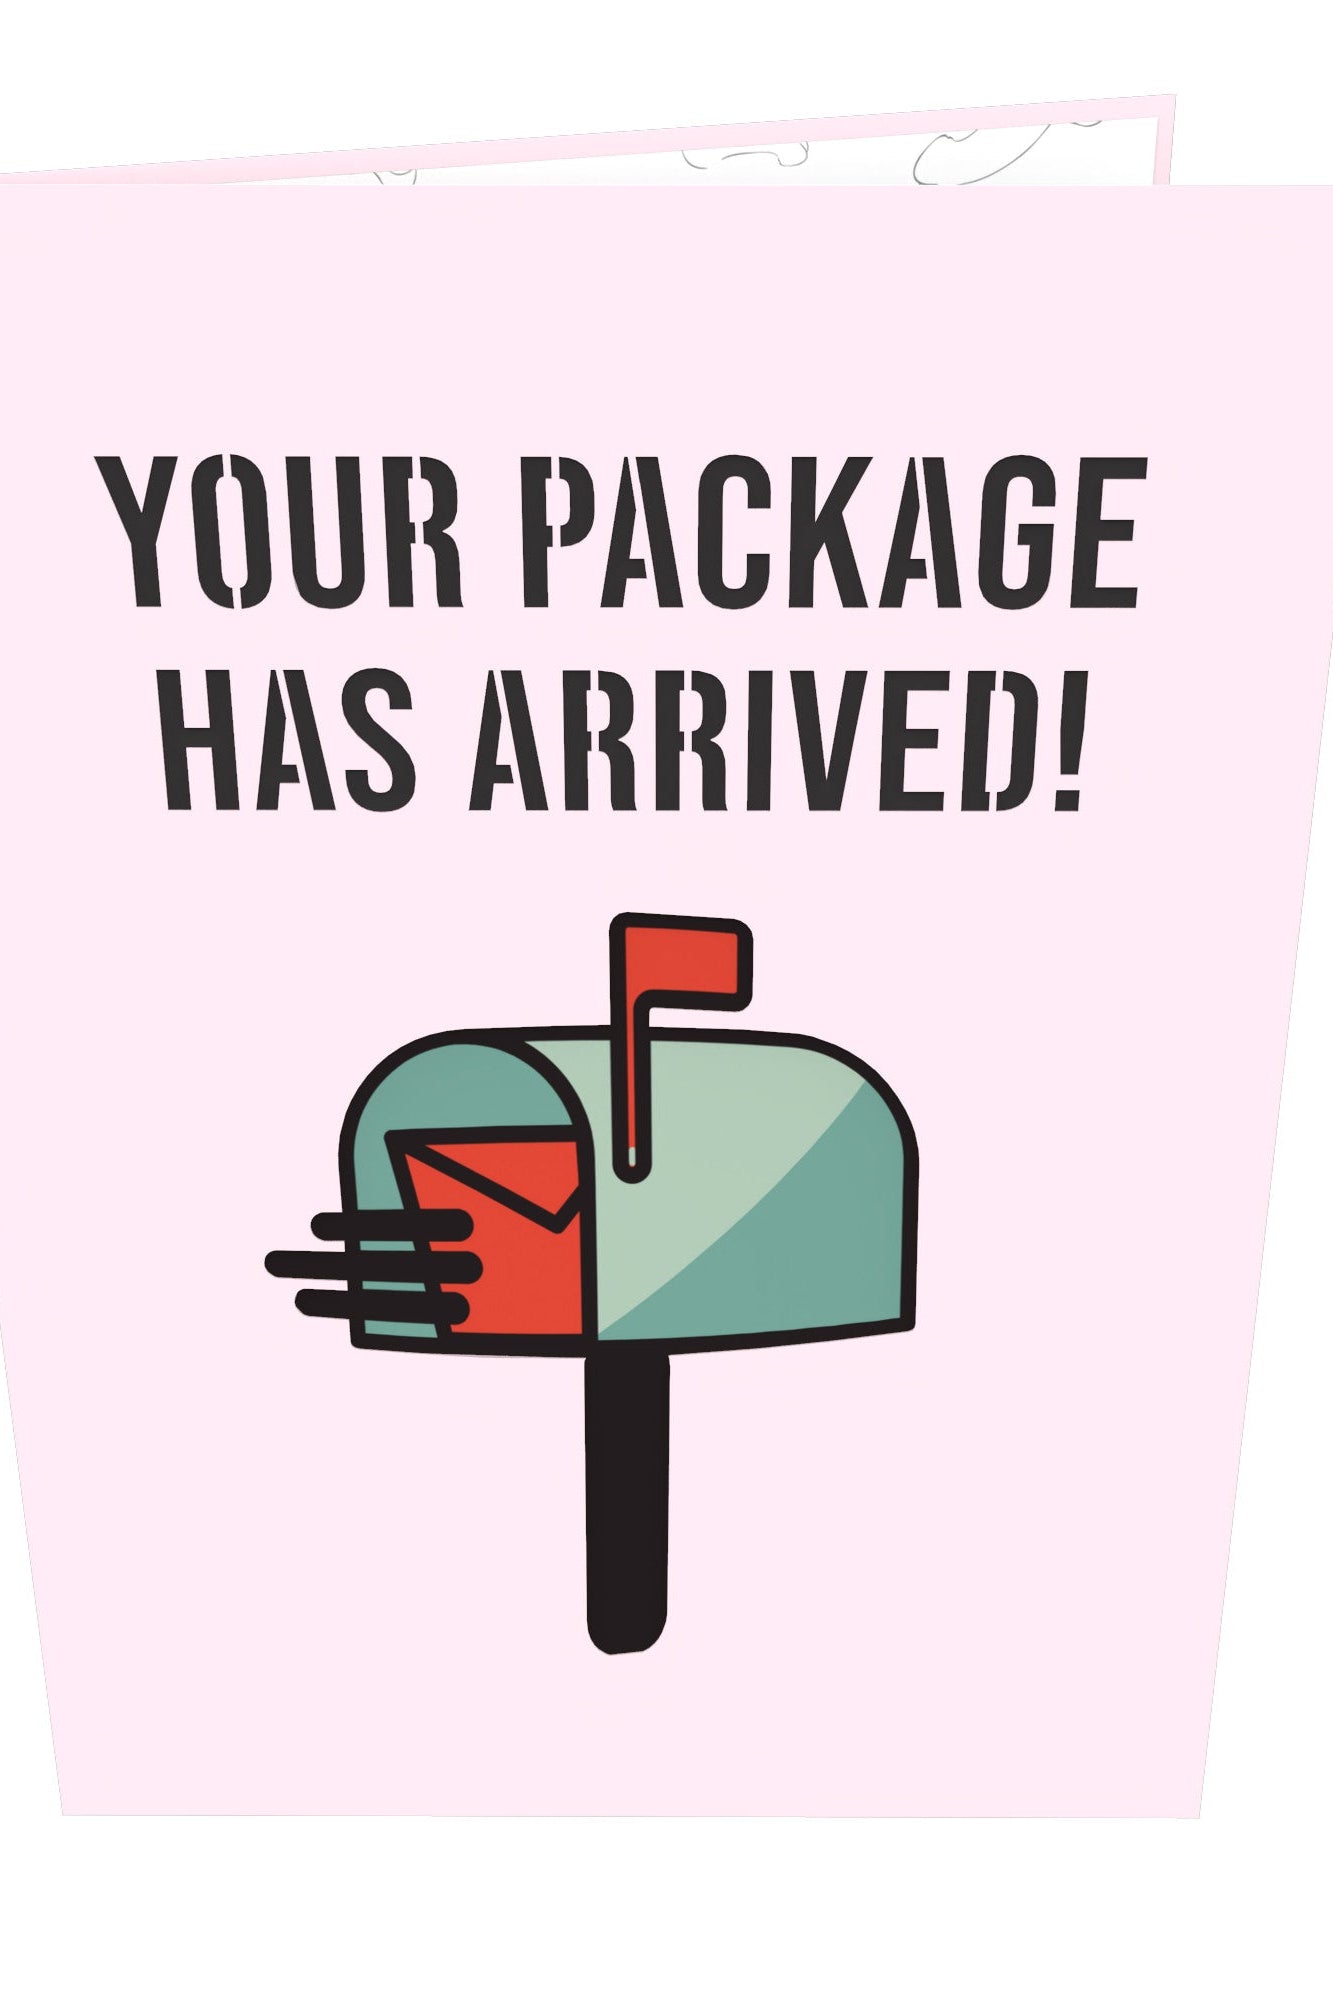 Your Package Has Arrived Extra Naughty Pop Up Greeting Card - UntamedEgo LLC.